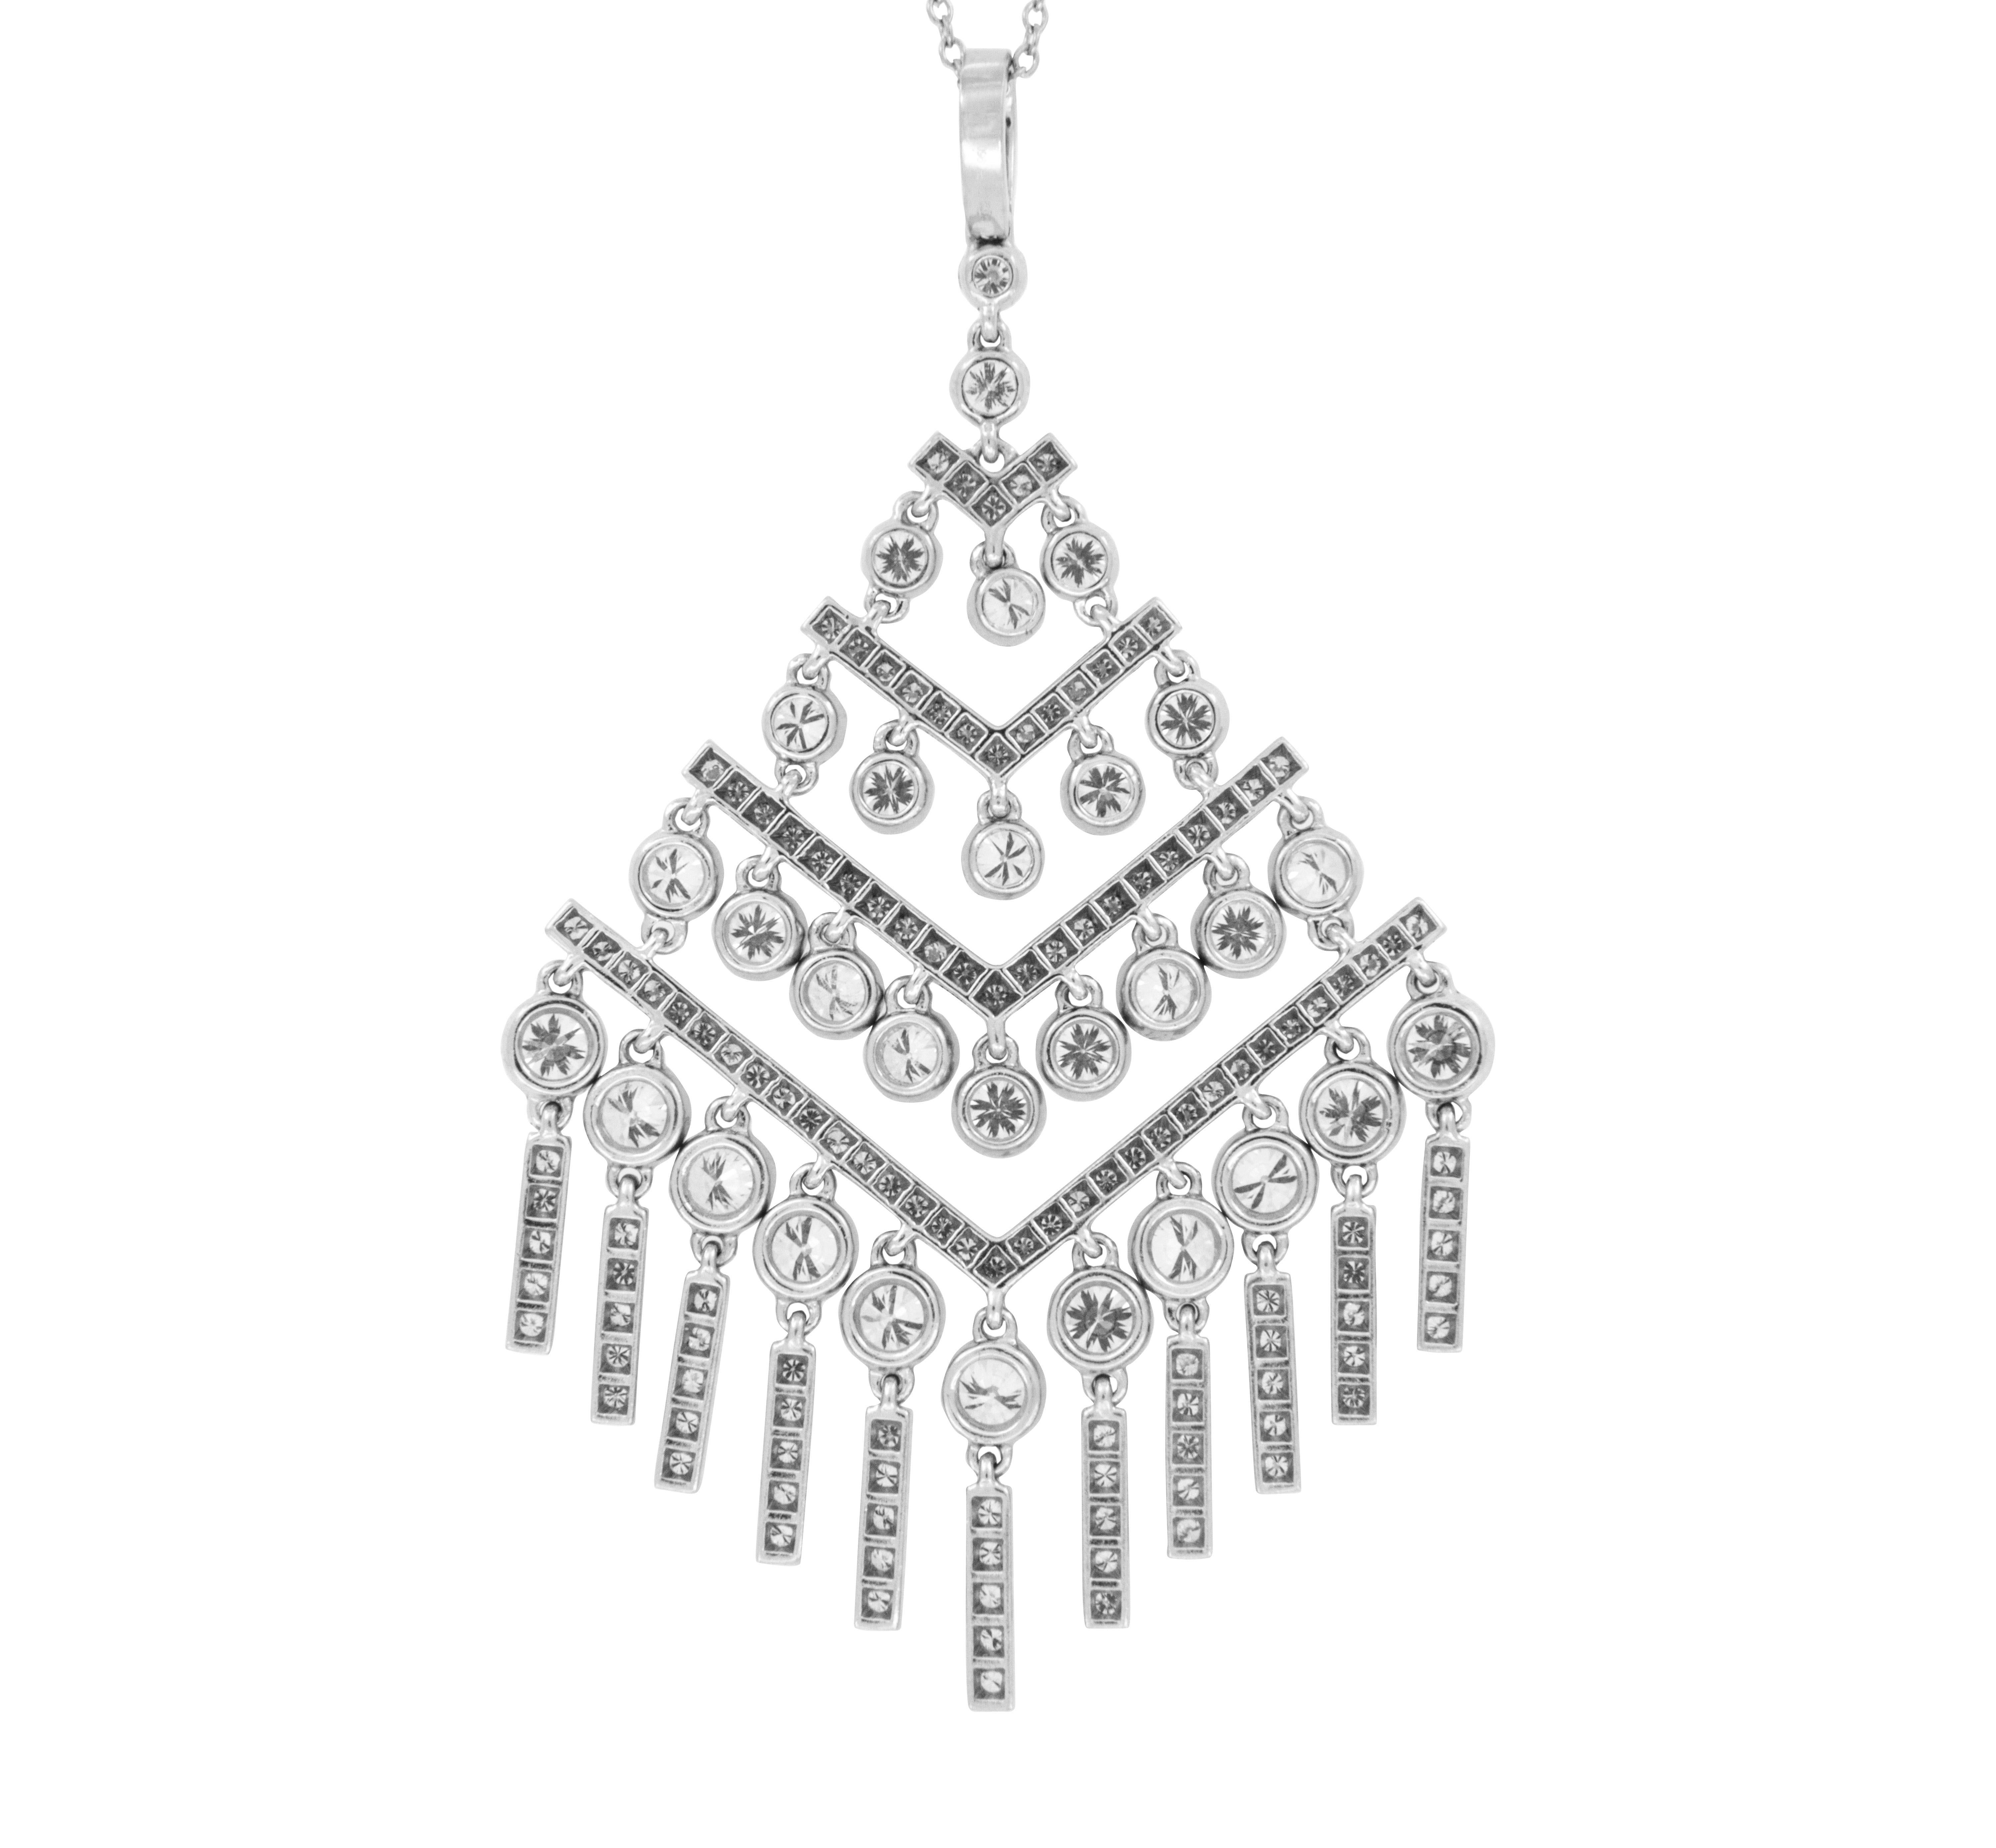 An authentic & elegant Tiffany & Co. necklace from the Jazz Collection crafted in platinum in the roaring 20's style! 162 round brilliant cut diamonds (3.69 Cttw est.) of exceptional quality ( D-F color, VVS clarity) are pave' & bezel set while